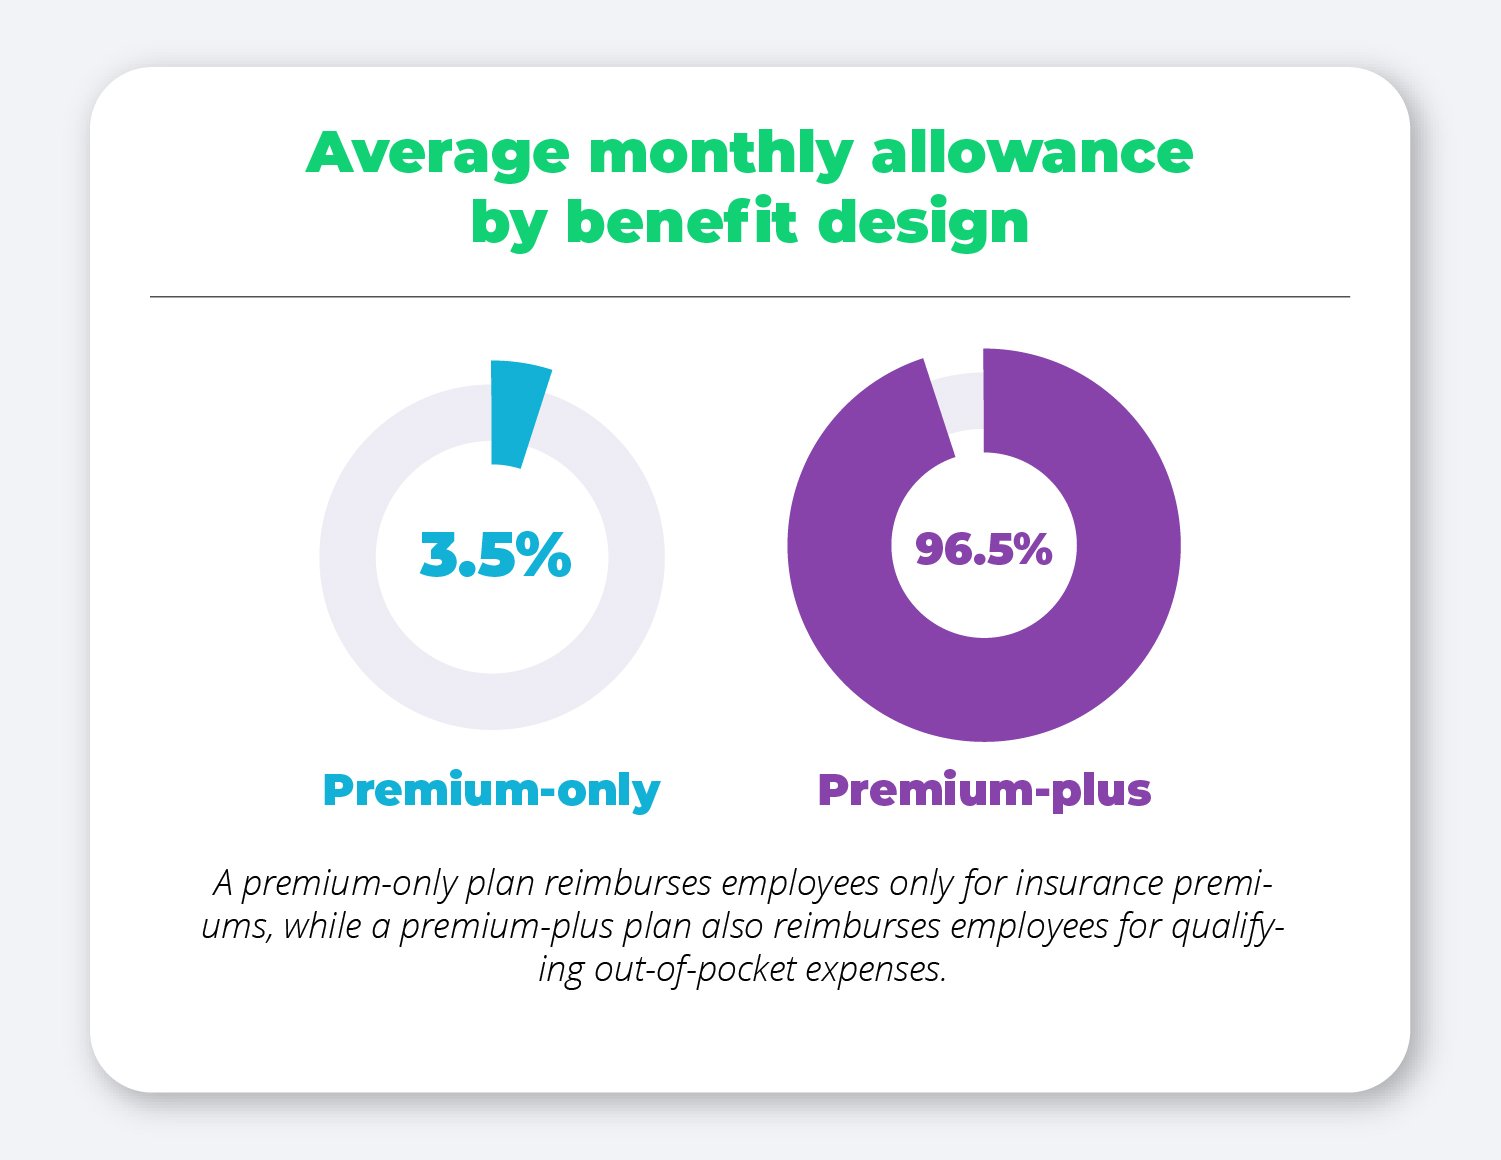 Average monthly allowance by benefit design